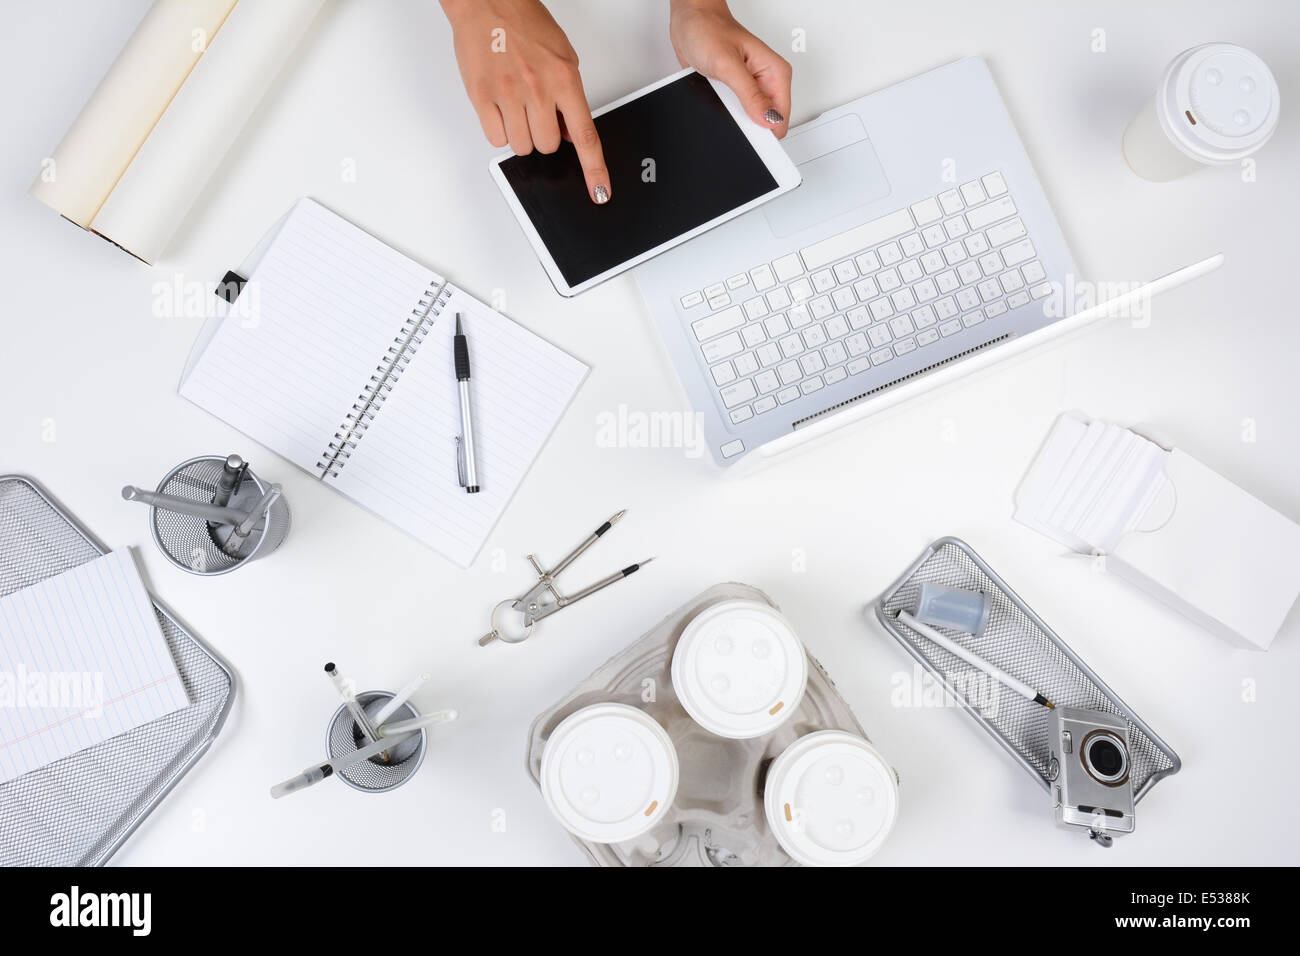 High angle shot of a white desk with primarily white and silver office objects, with a woman holding a tablet computer Stock Photo